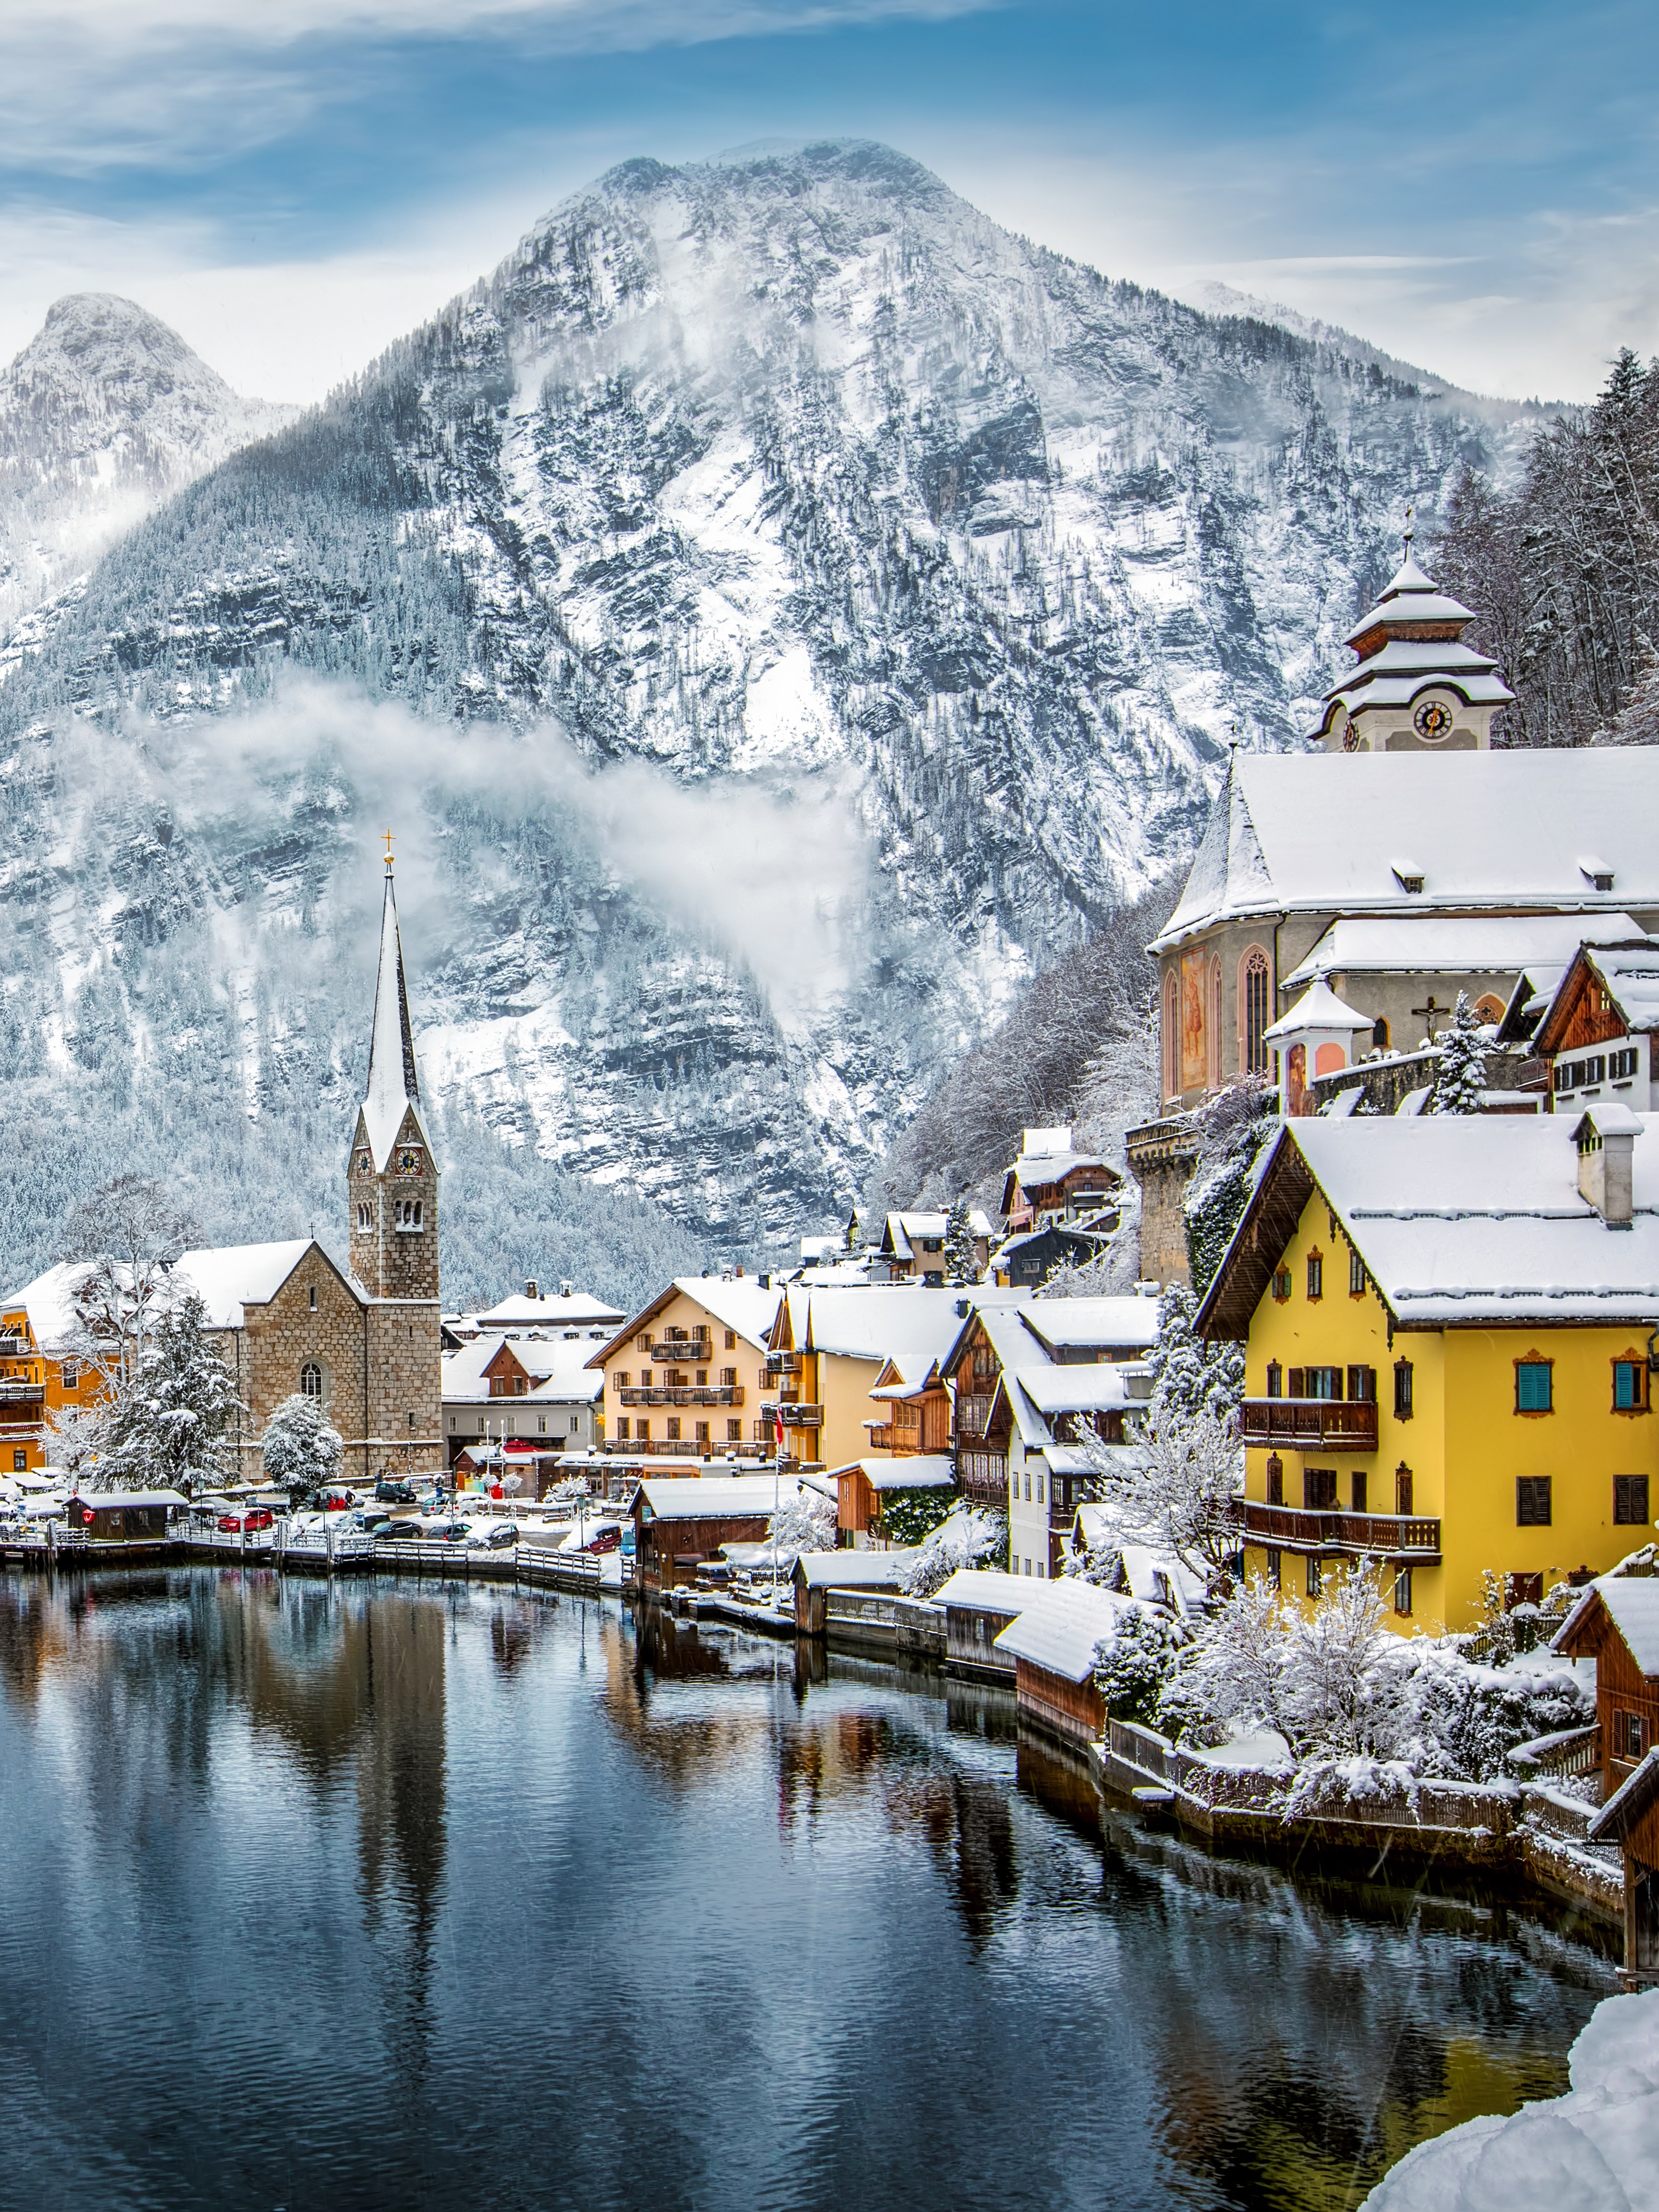 Europe In Winter: 21 European Cities That Are Even Better In The Off Season. Condé Nast Traveler